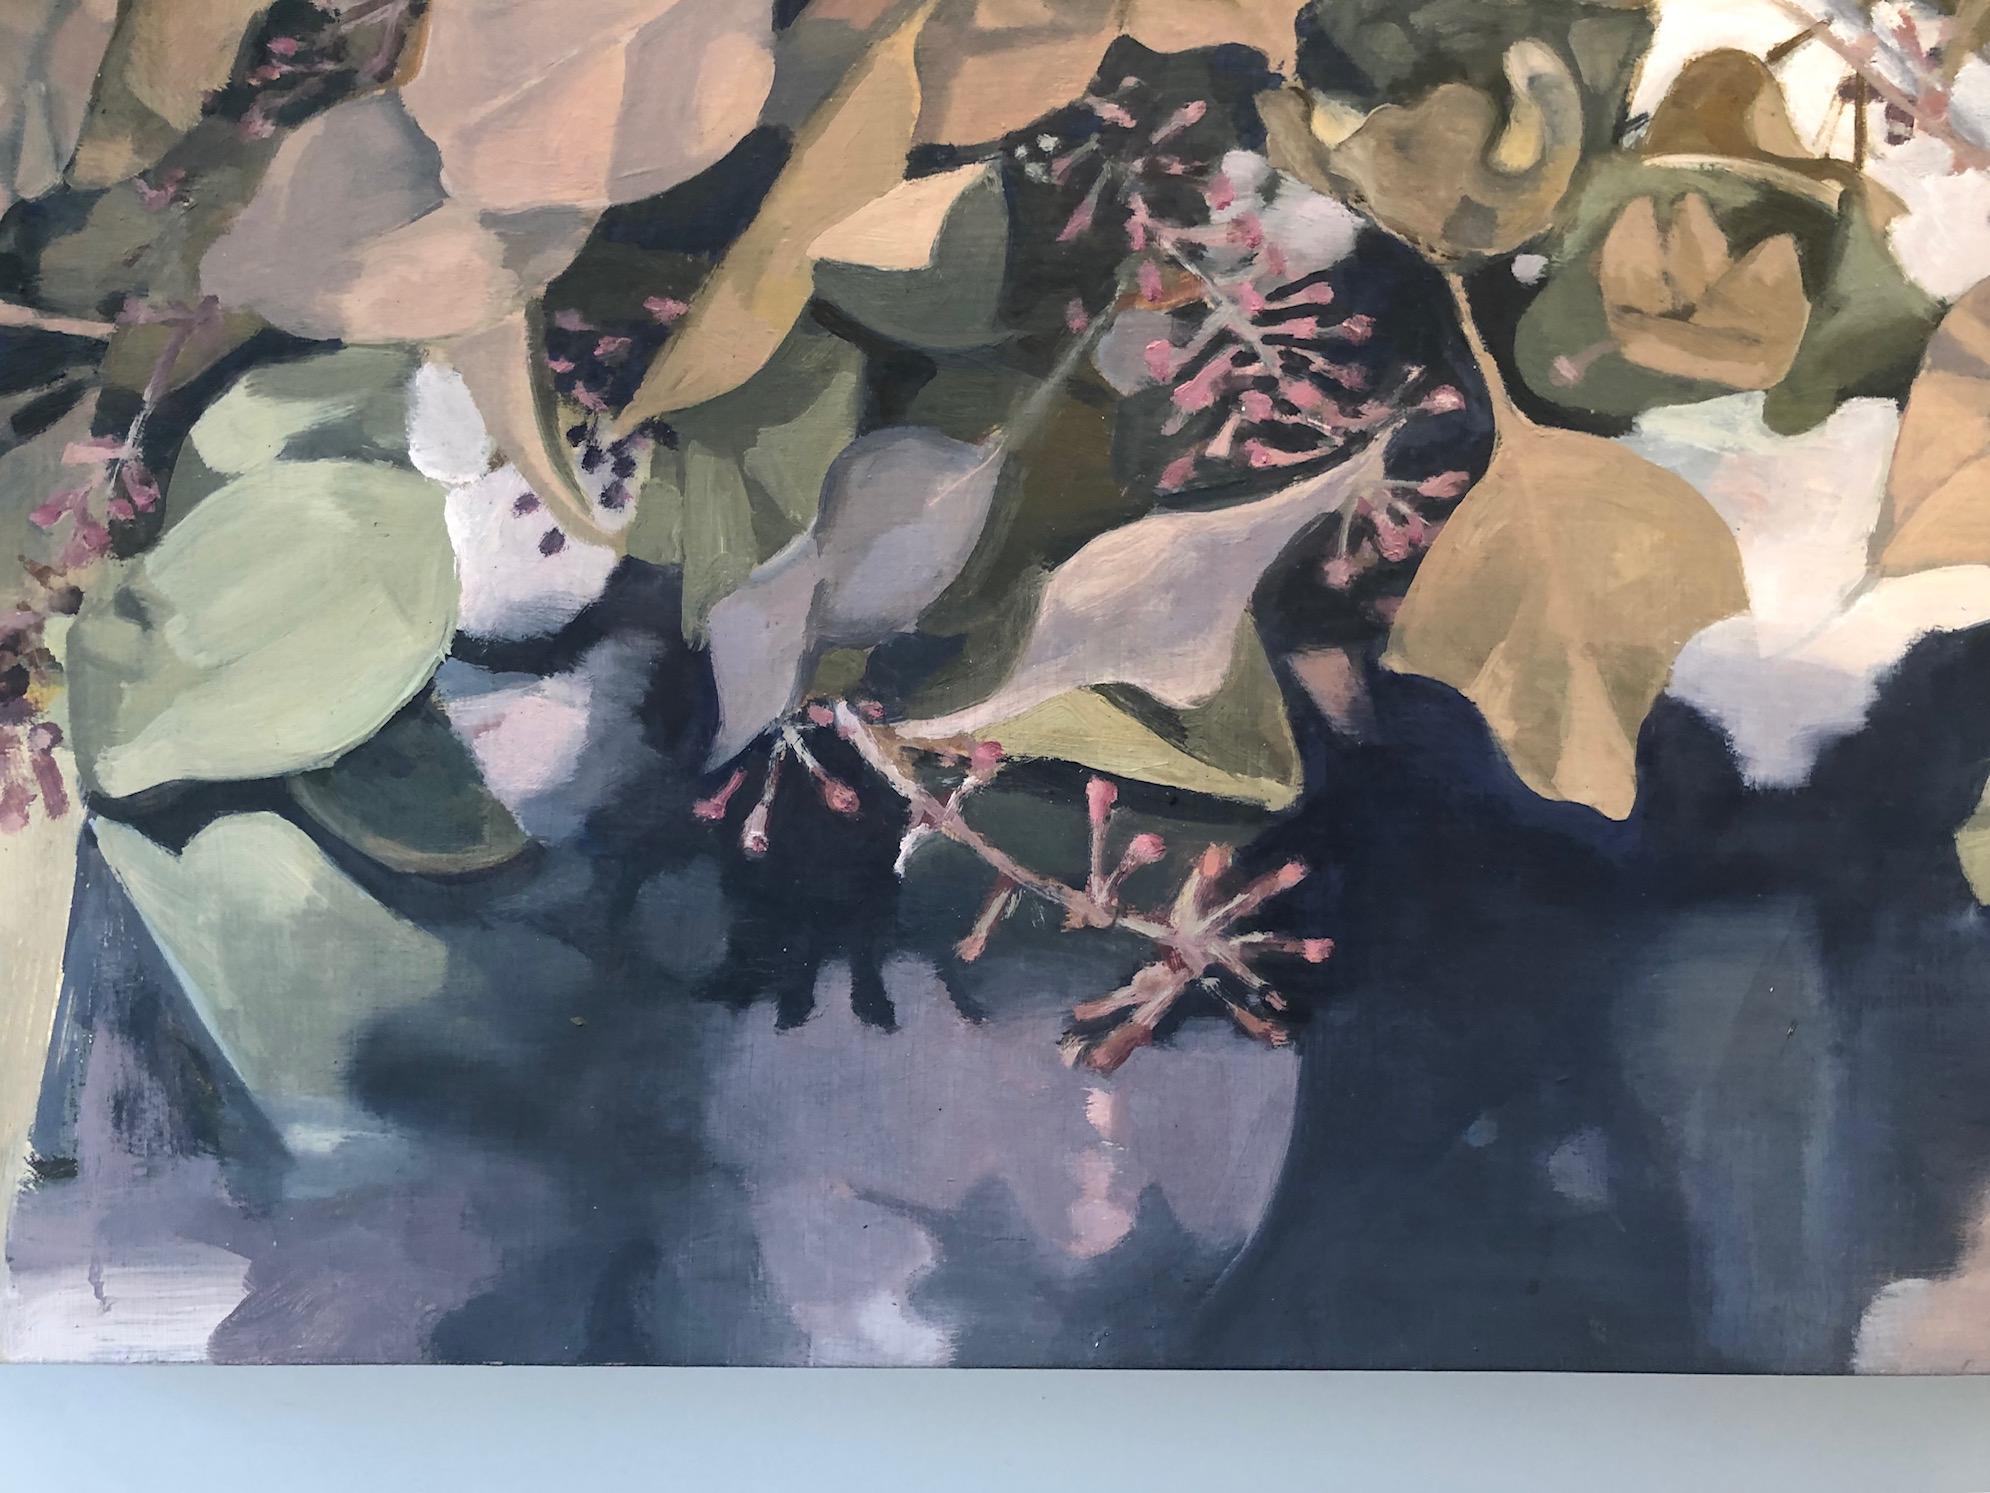 Reflections II / eucalyptus leaves, warm, nature, abstract oil painting on panel - Black Still-Life Painting by Stephanie Peek